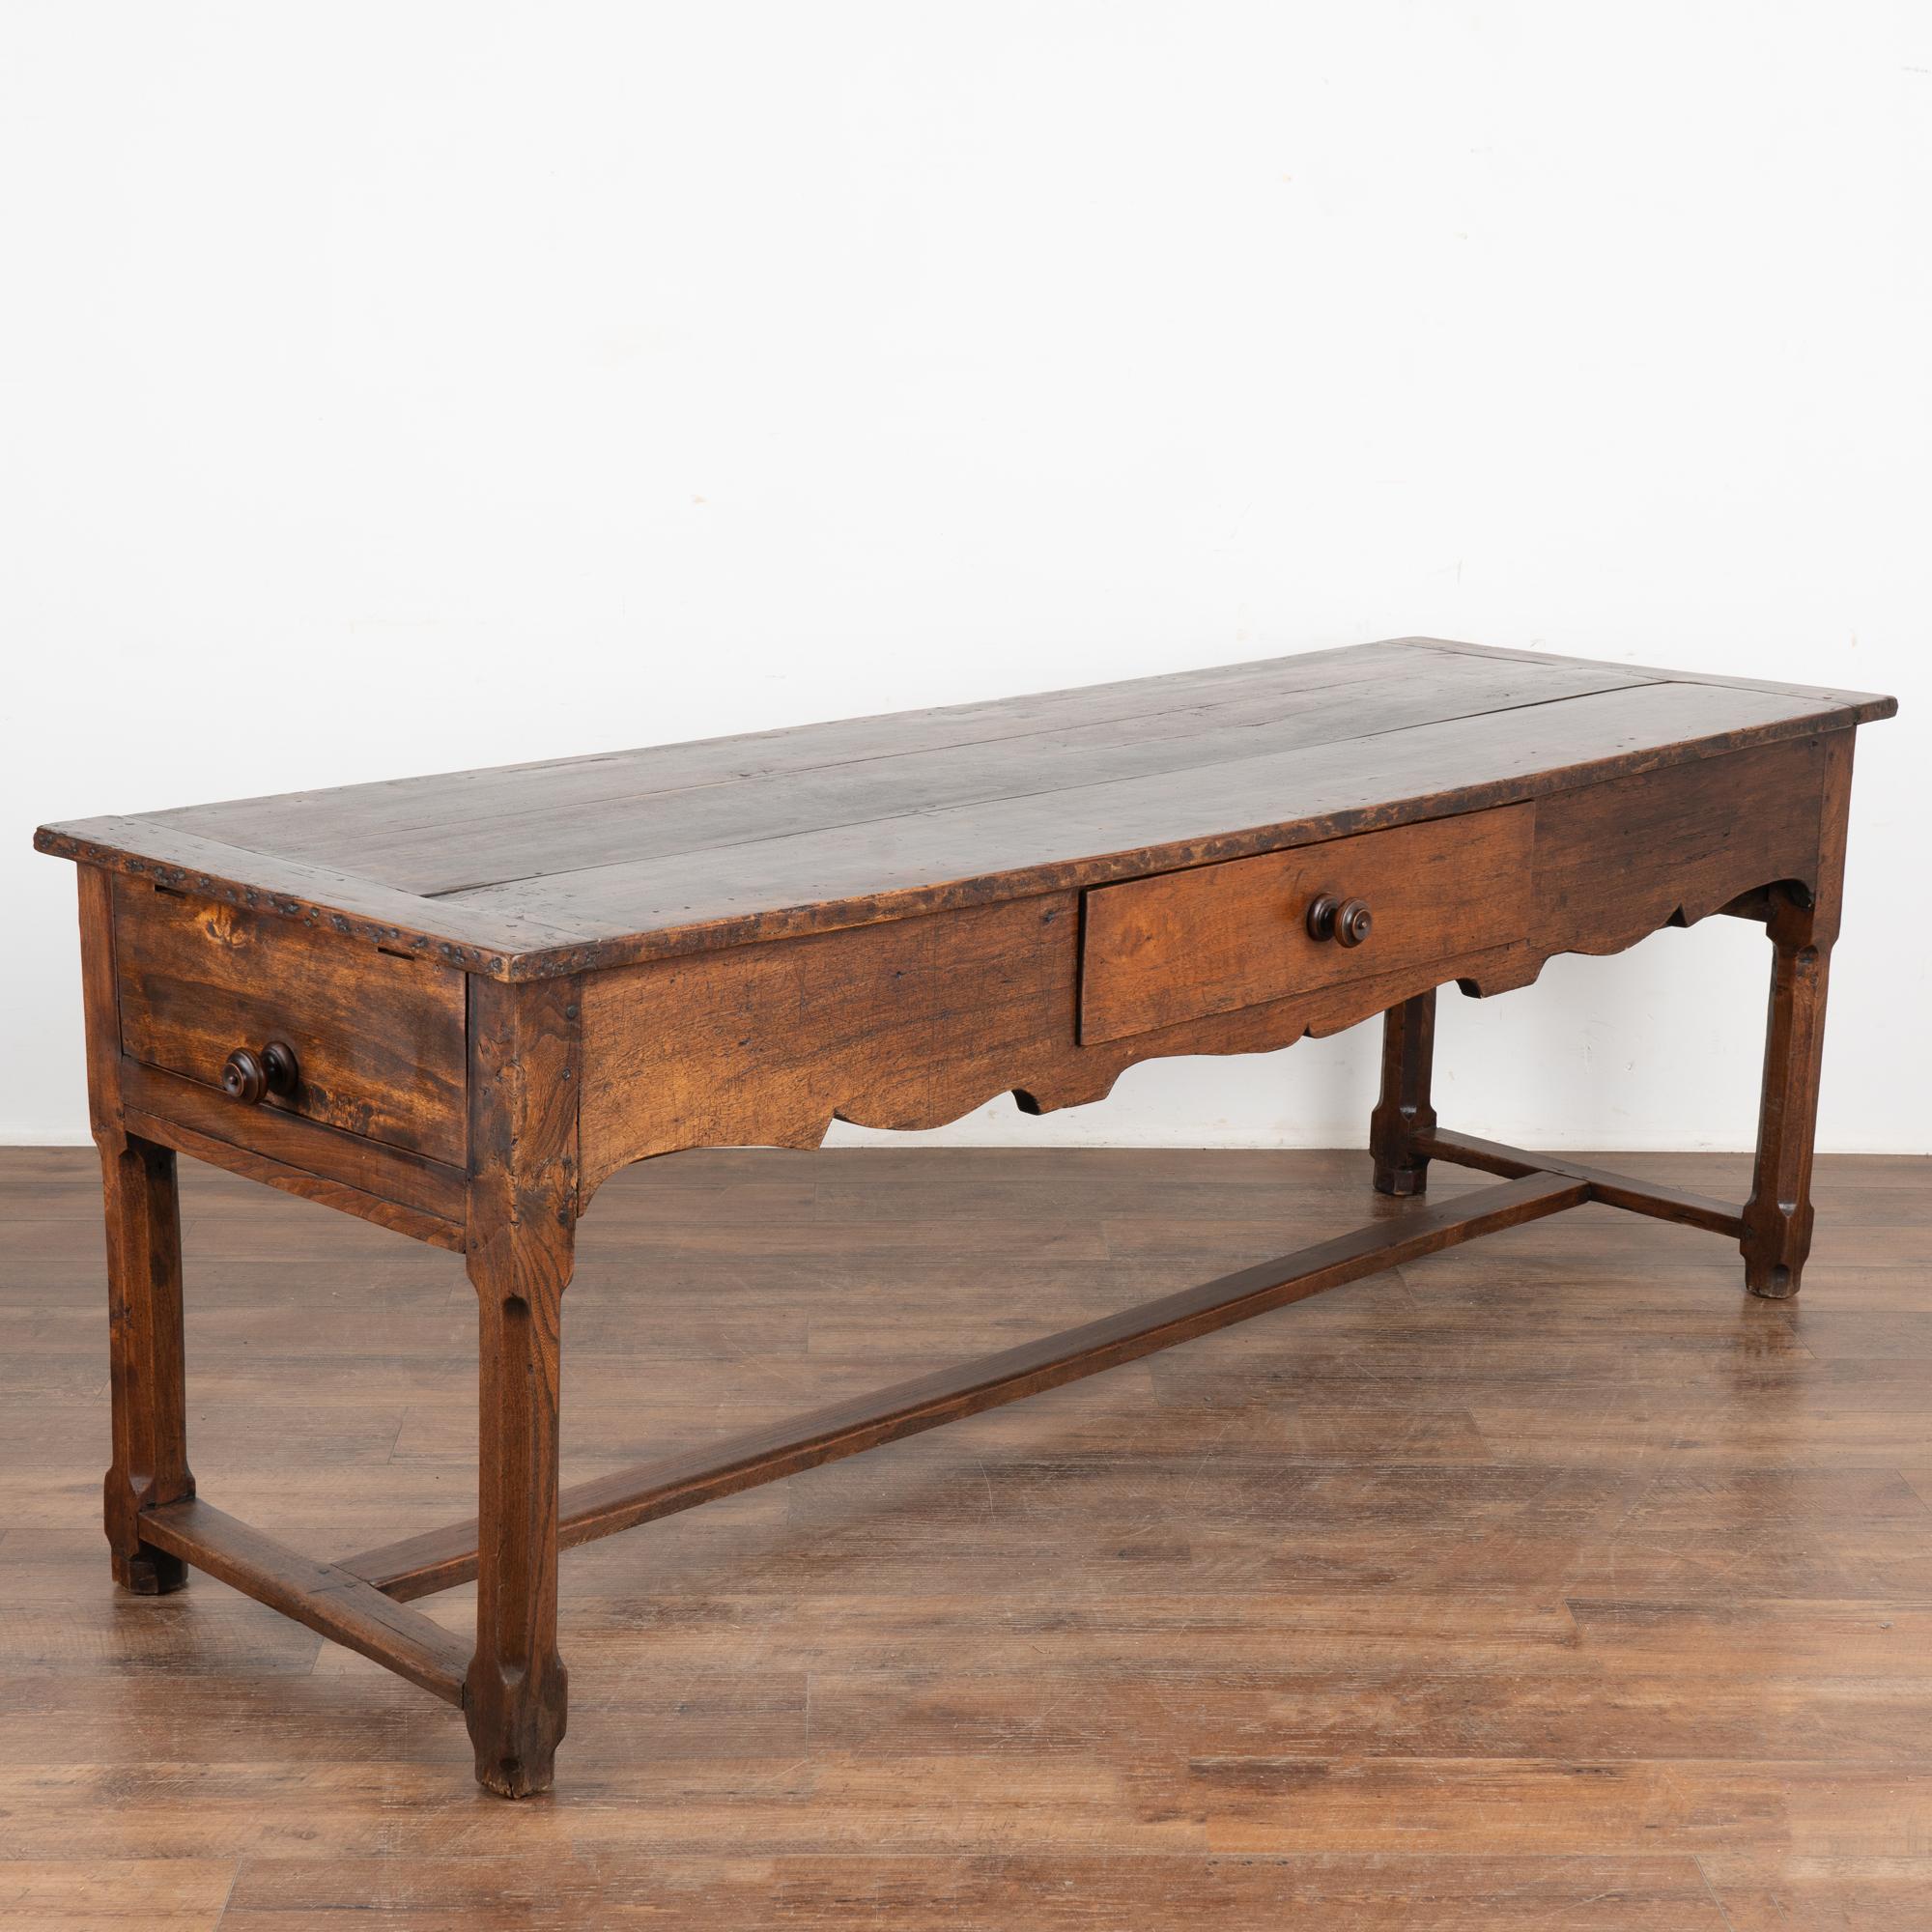 It is the stunning wood with deep aged patina that draws one to this 7' long console table from France.
The generations of use are revealed in every old knot, nick, crack, scratch and stain, etc. all resulting in the incredible patina that brings